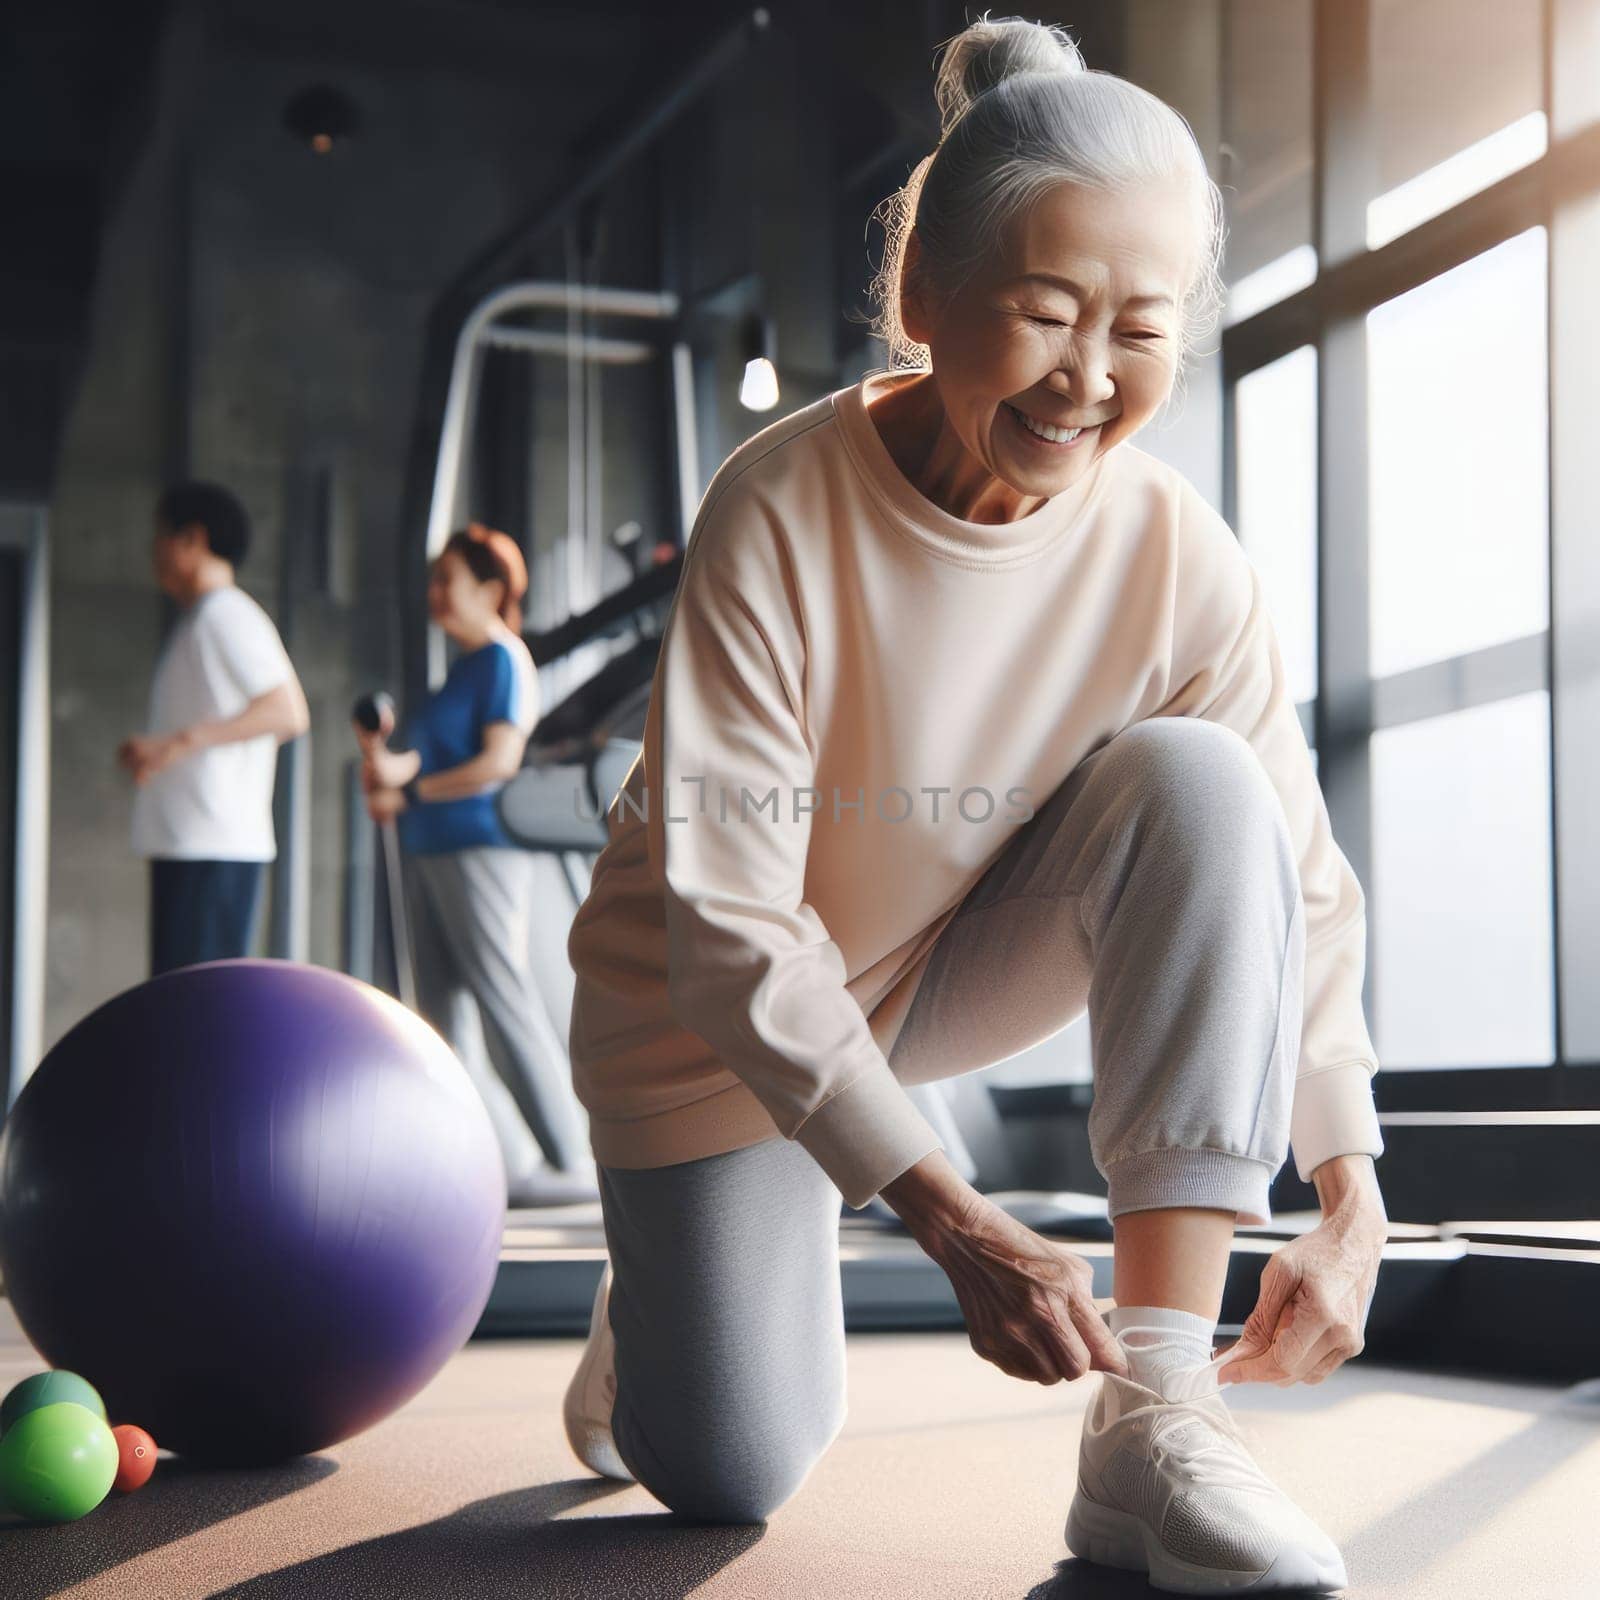 Happy senior asian woman tying her shoelaces in a gym, with other people exercising in the background